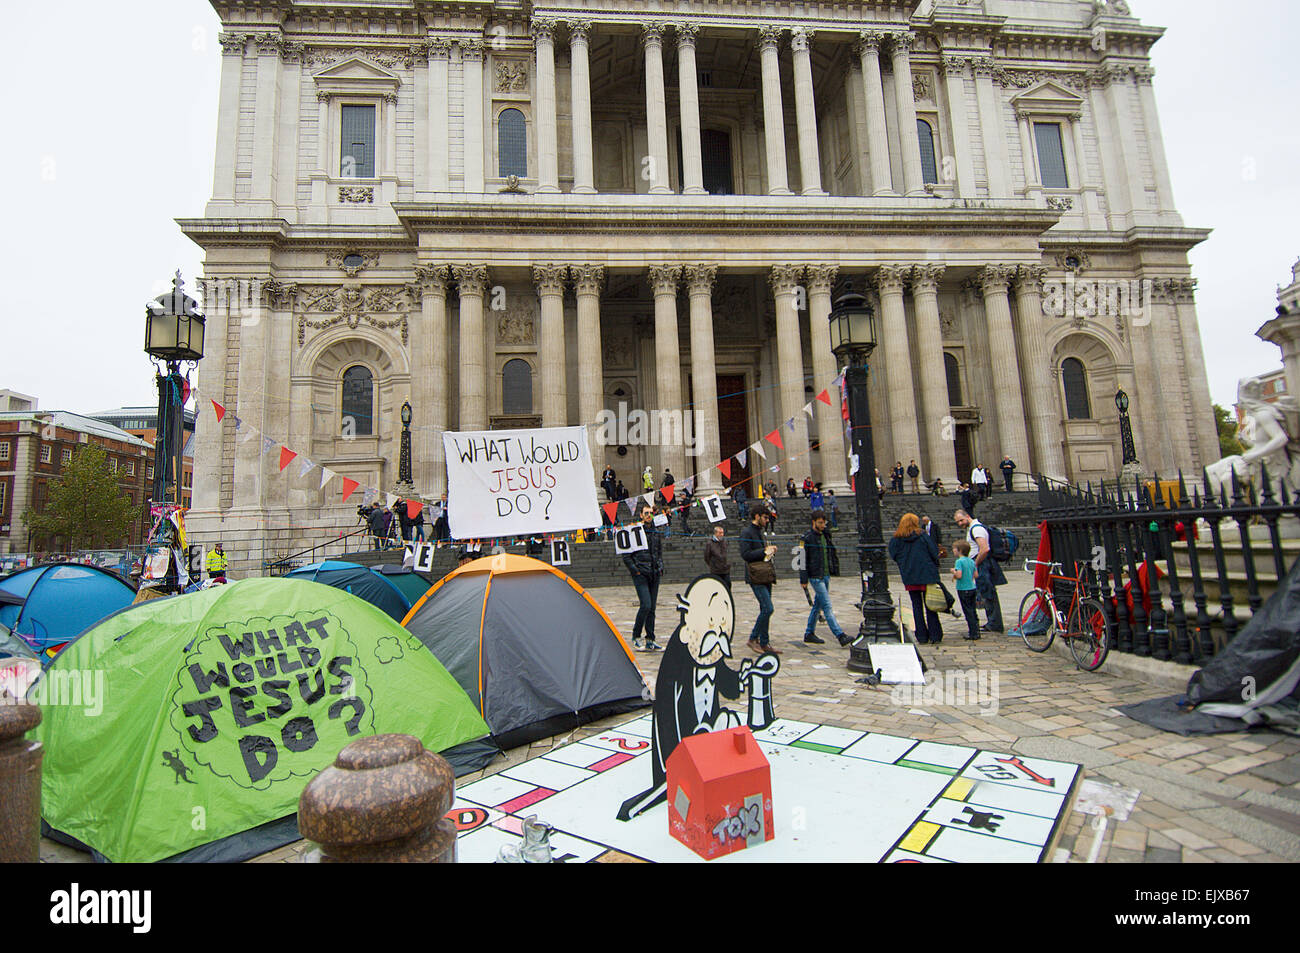 The Occupy protest resulted in a camp site outside St. Paul's Cathedral which went on for 4 months in 2011/2012. Stock Photo